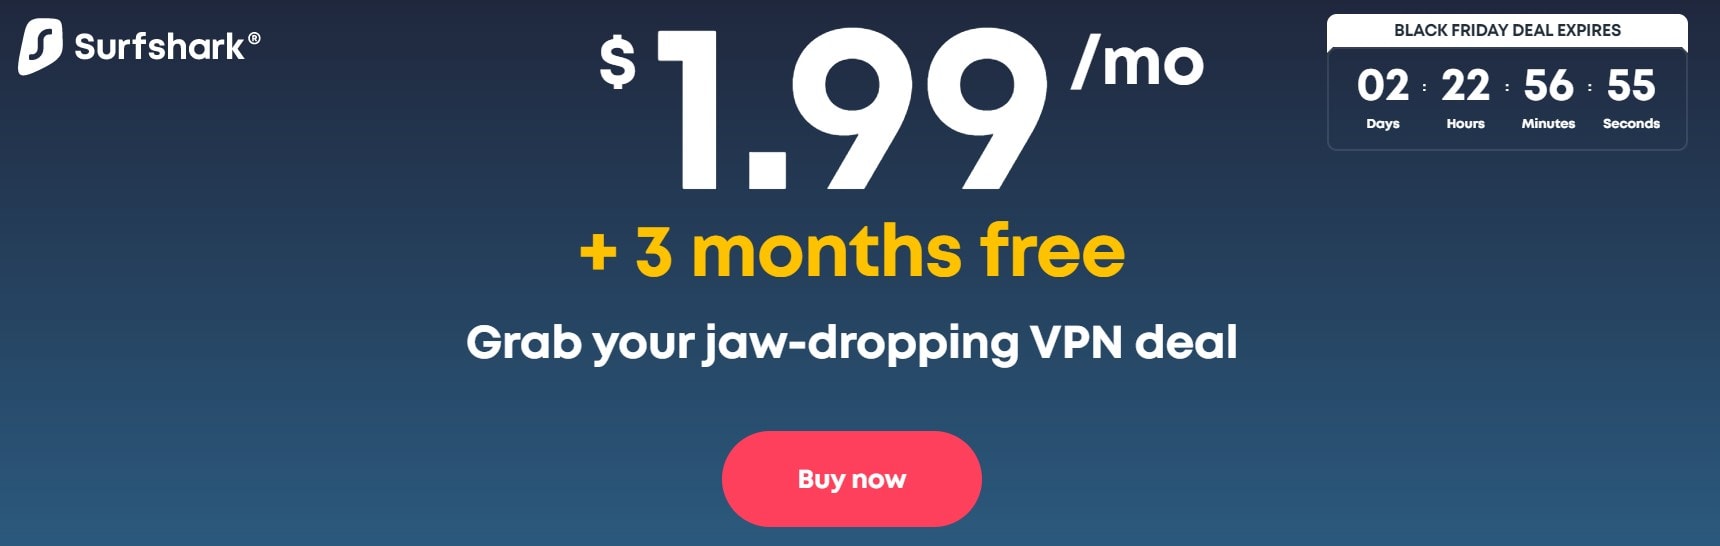 The Best Vpn Deals For Black Friday Cyber Monday 2020 Images, Photos, Reviews